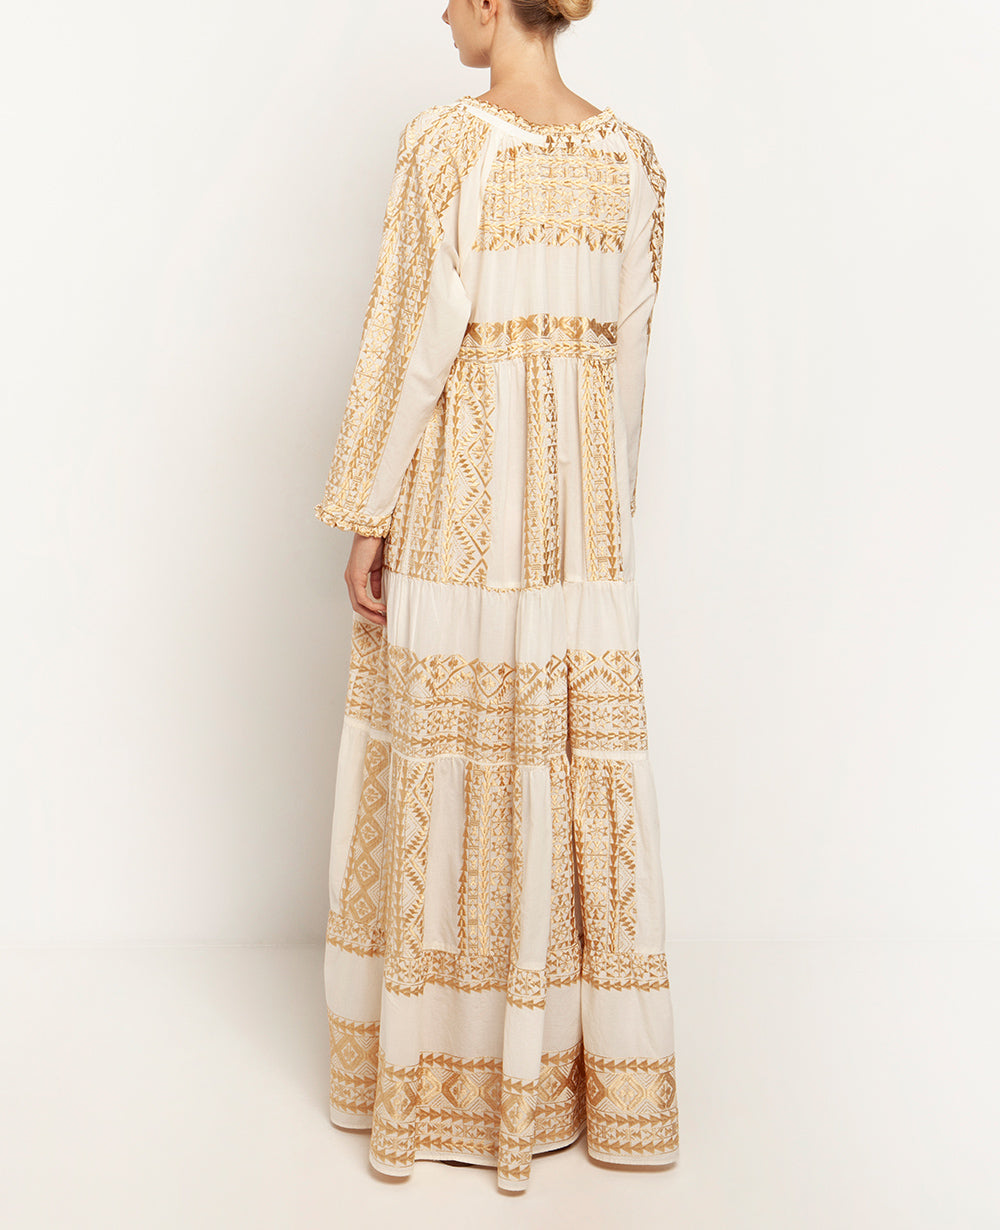 LONG DRESS "EMBROIDERED"